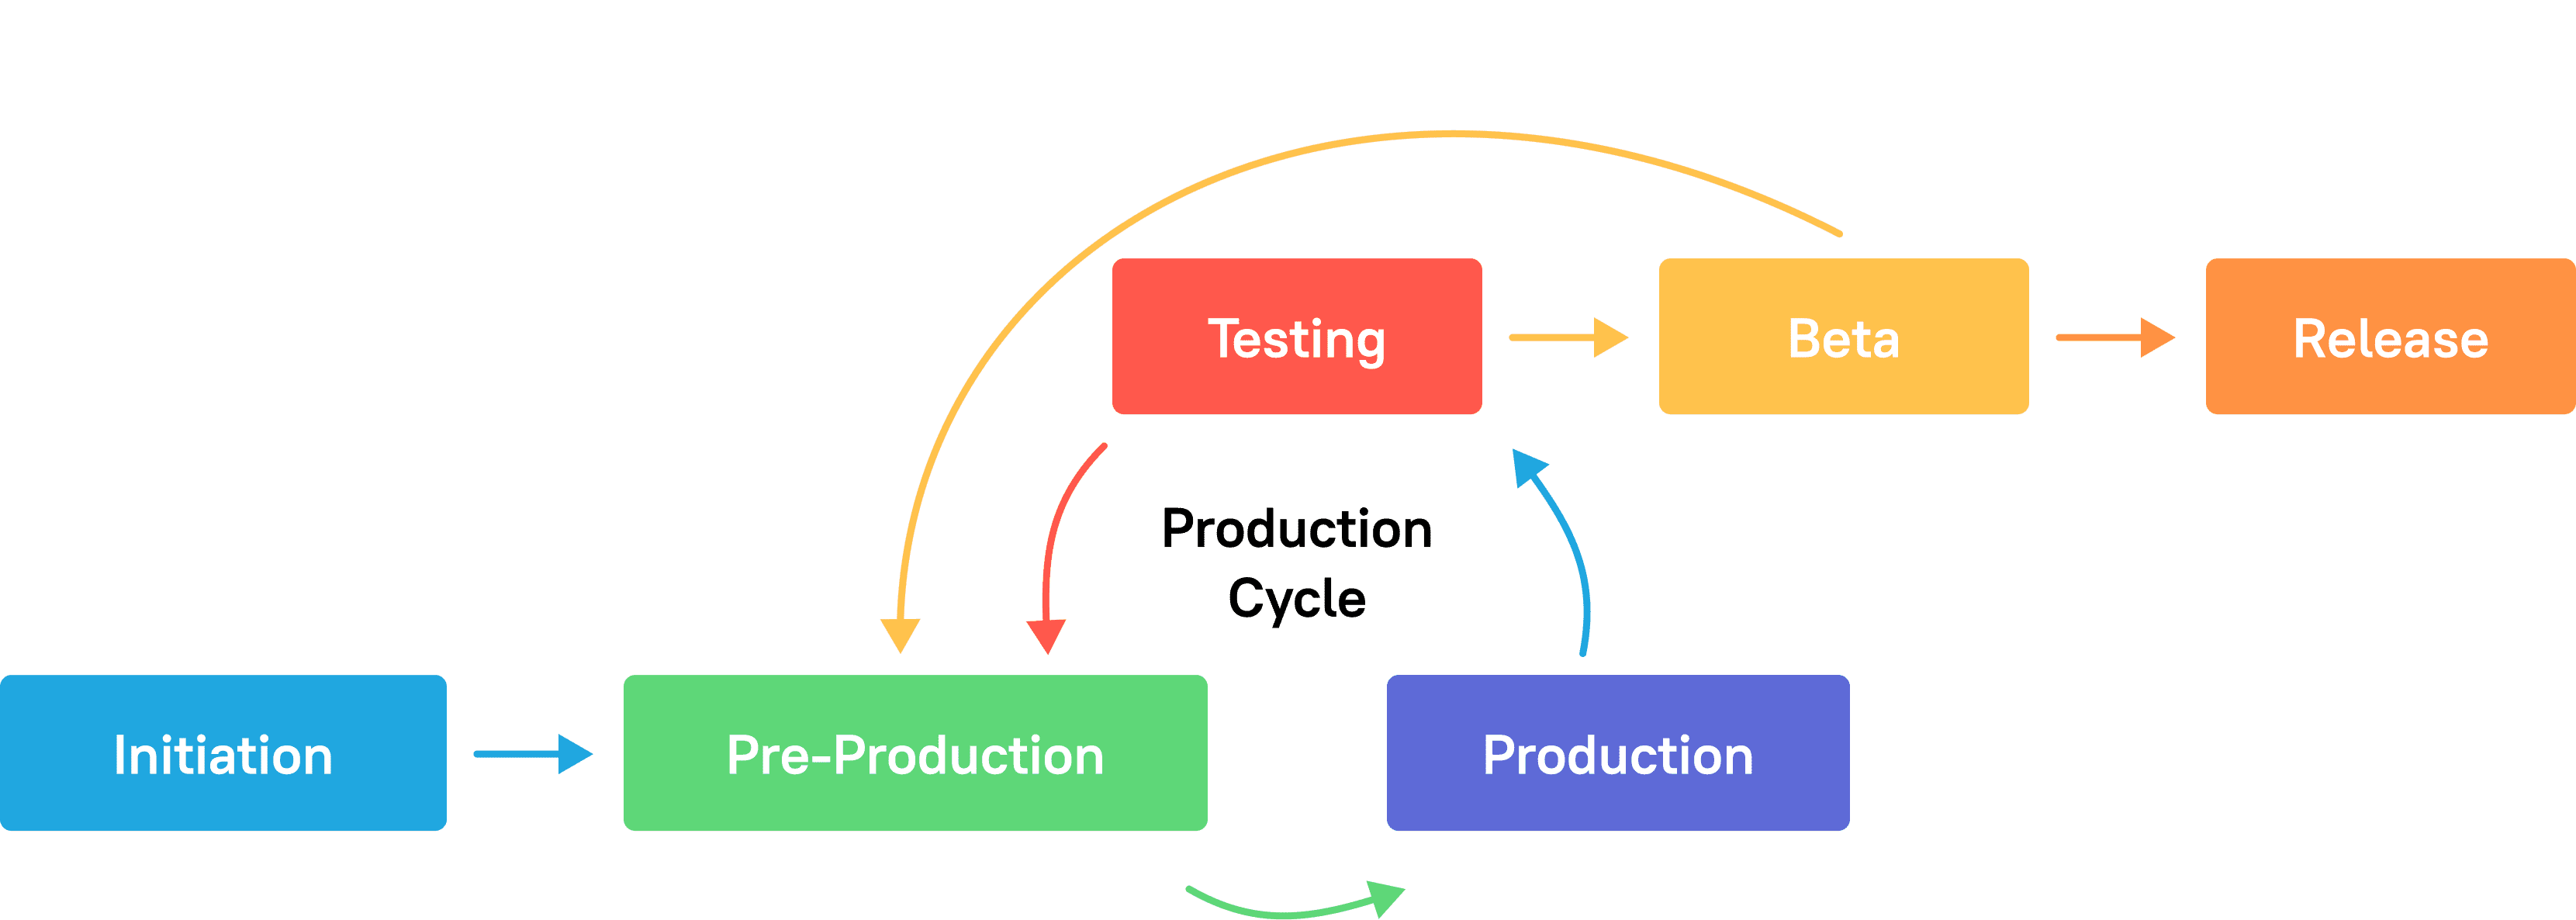 Games testing in the project lifecycle